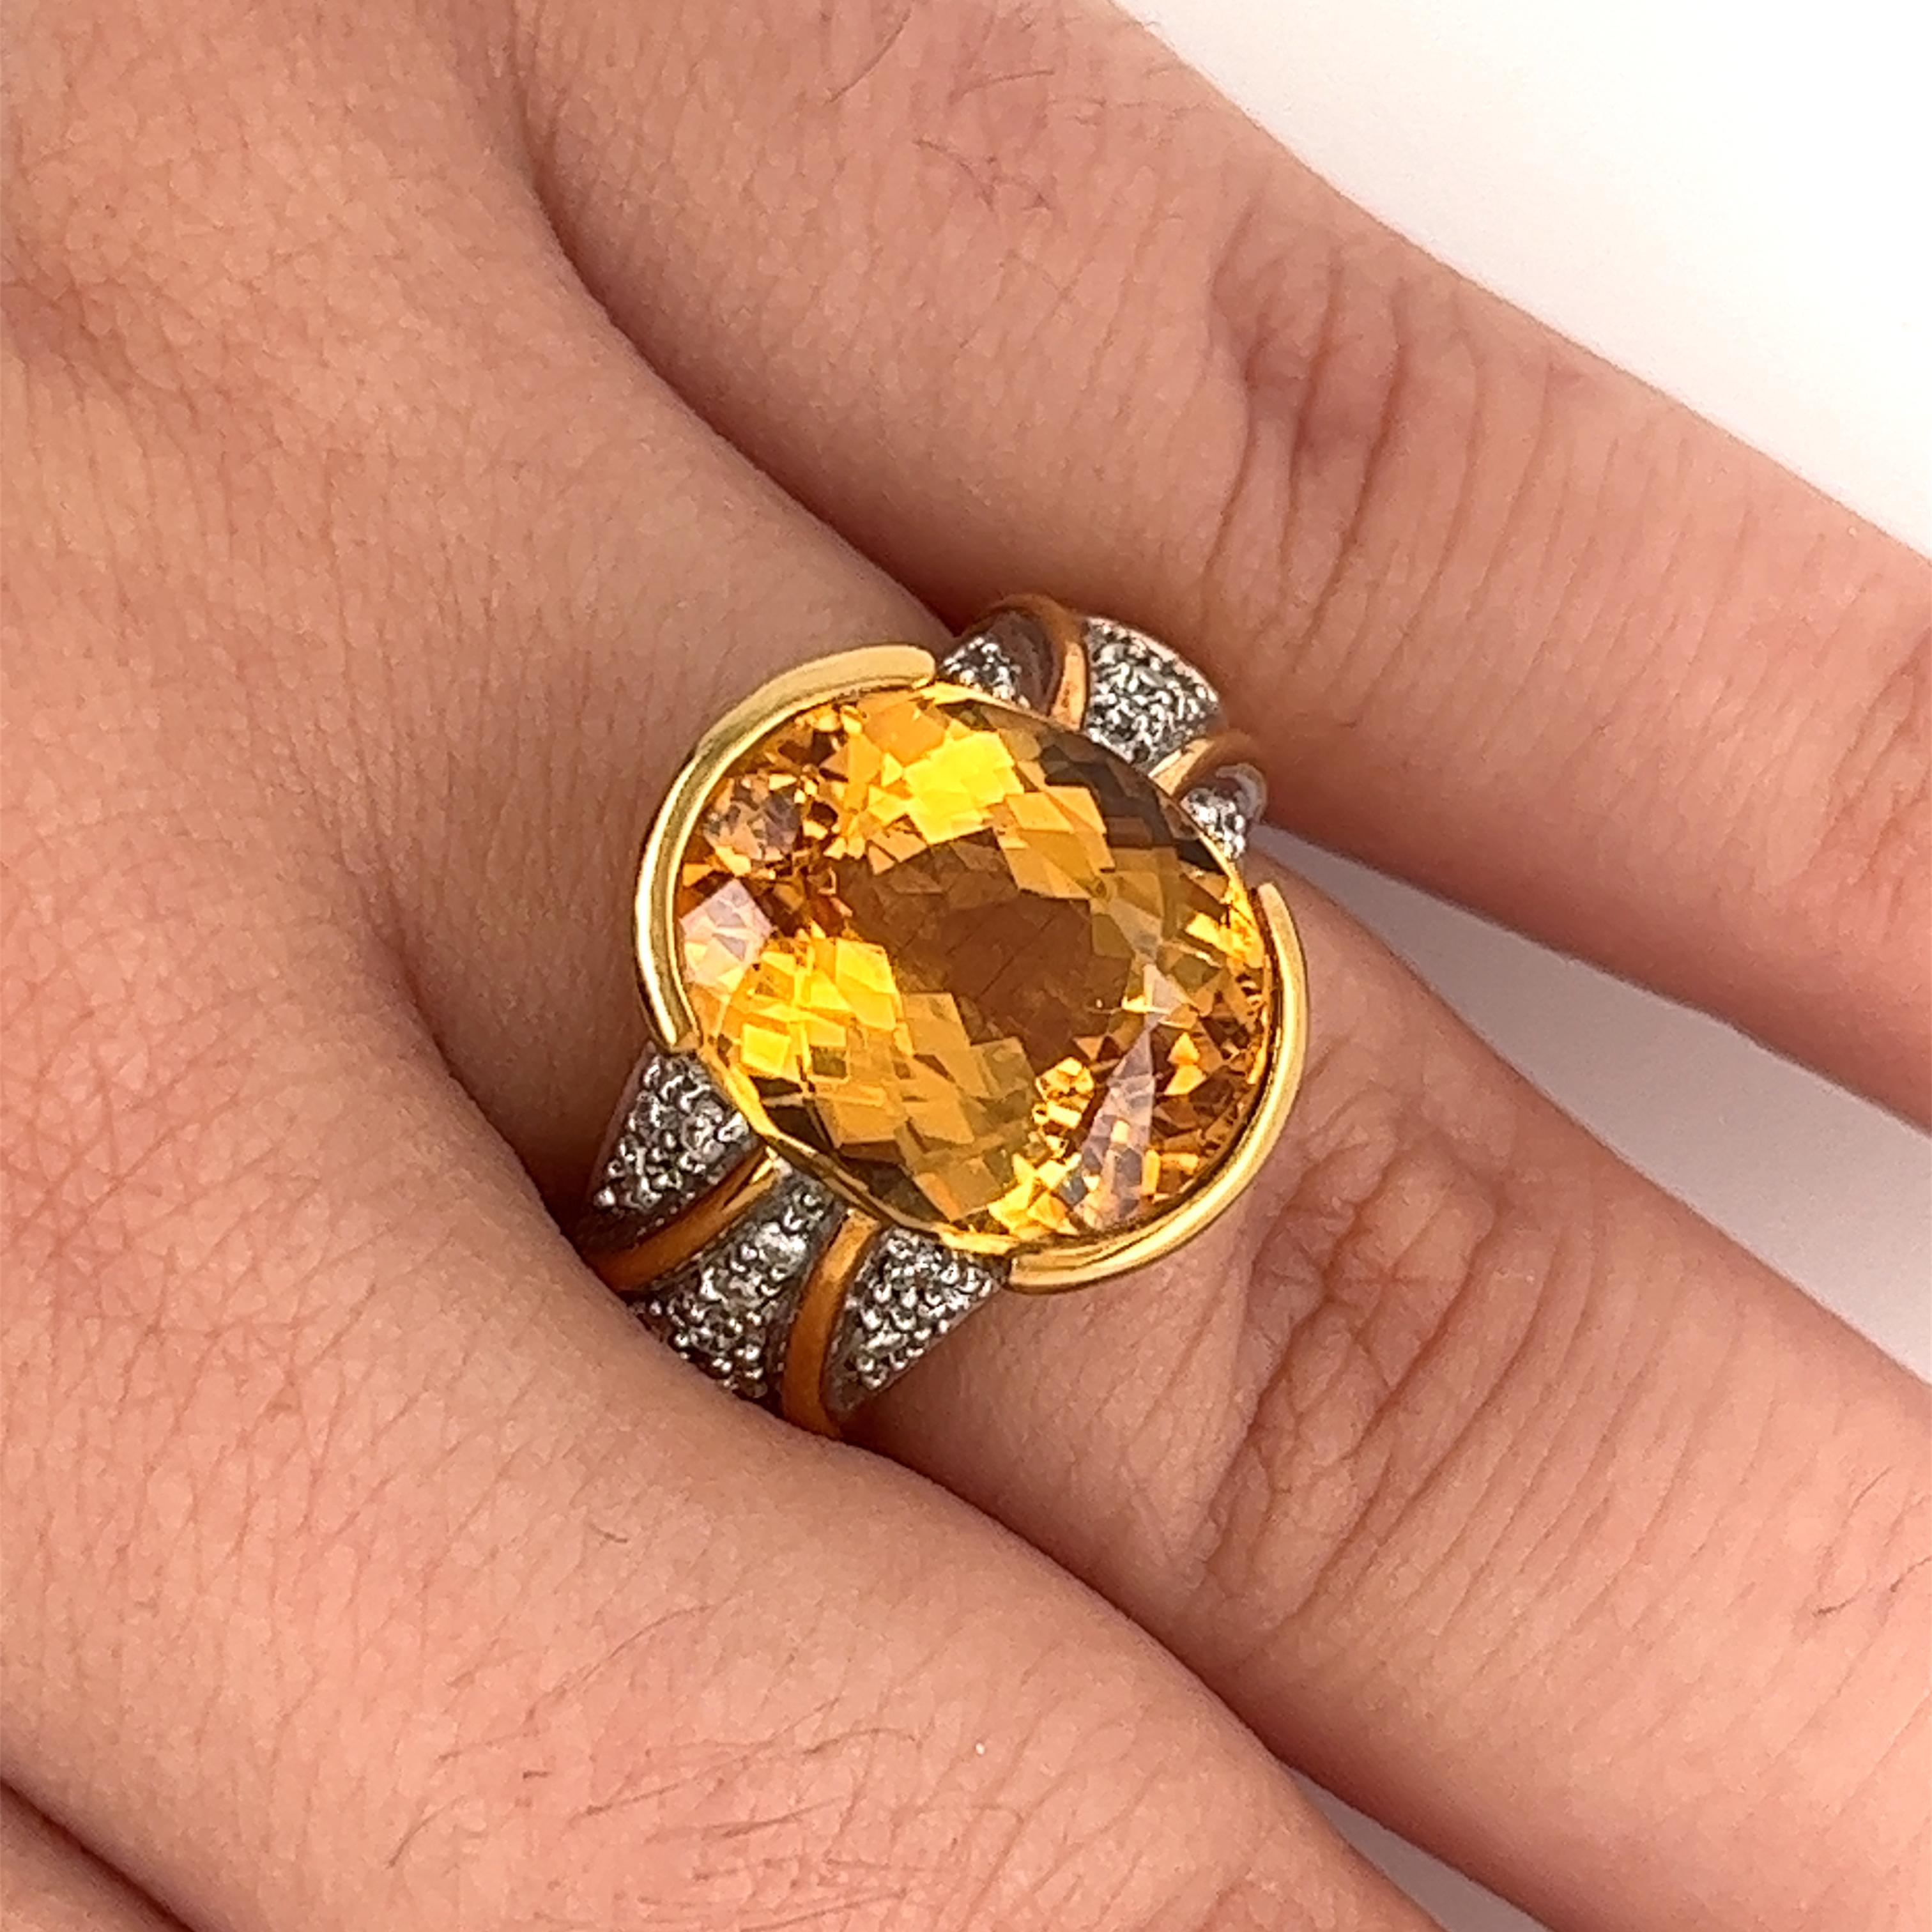 Vintage 10.5 Carat Oval Cut Precious Topaz & Curved Diamond Ring in 18k Gold  For Sale 1